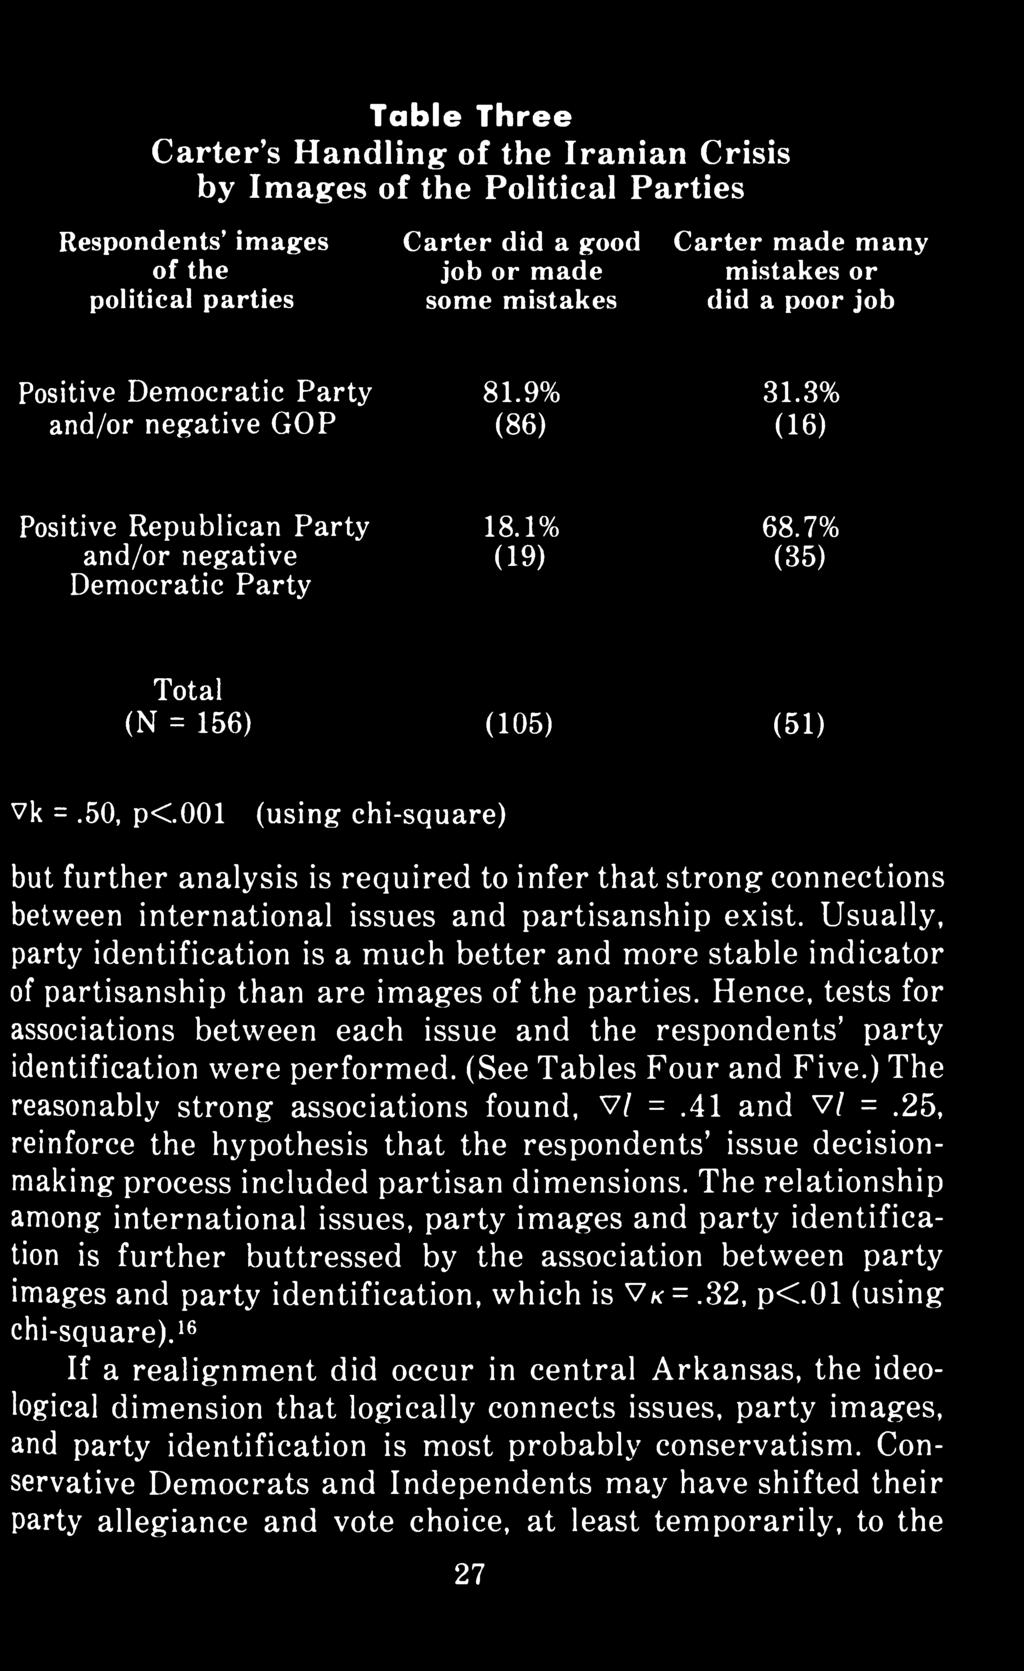 Hence, tests for associations between each issue and the respondents party identification were performed. (See Tables Four and Five.) The reasonably strong associations found, V/ =.41 and V/ =.